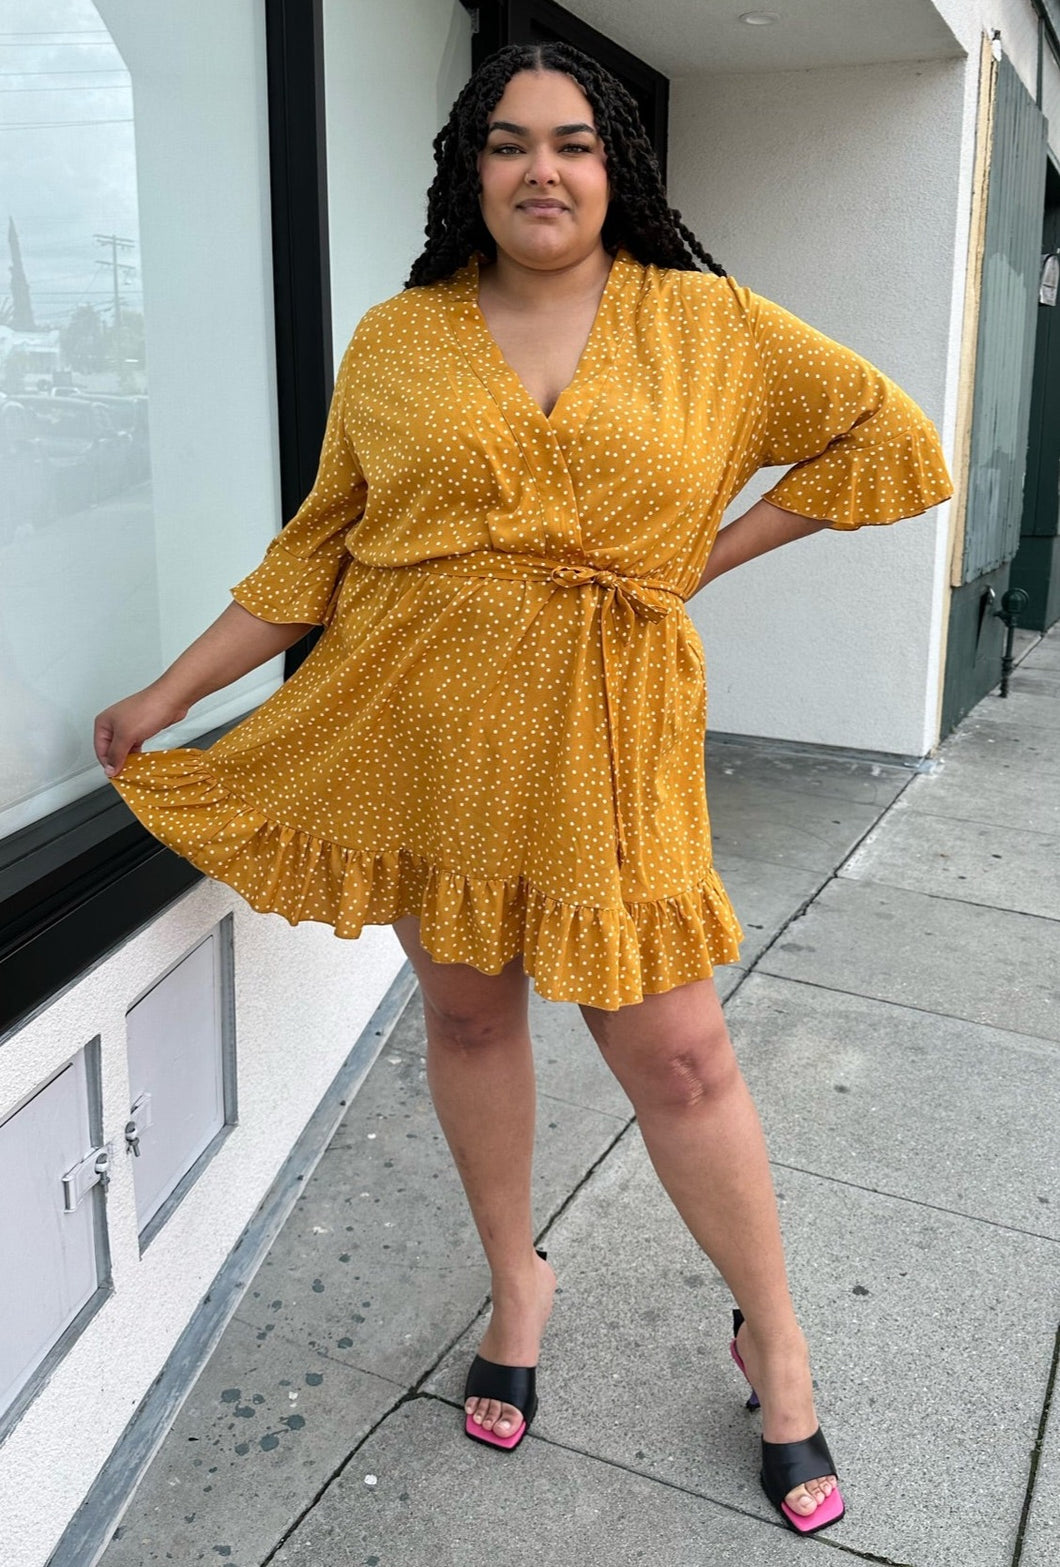 Full-body front view showing off the skirt hem of a size 20 Boohoo mustard yellow faux wrap mini dress with white polka dots, a ruffle hem, and a subtle bell sleeve styled with black heels on a size 18/20 model.